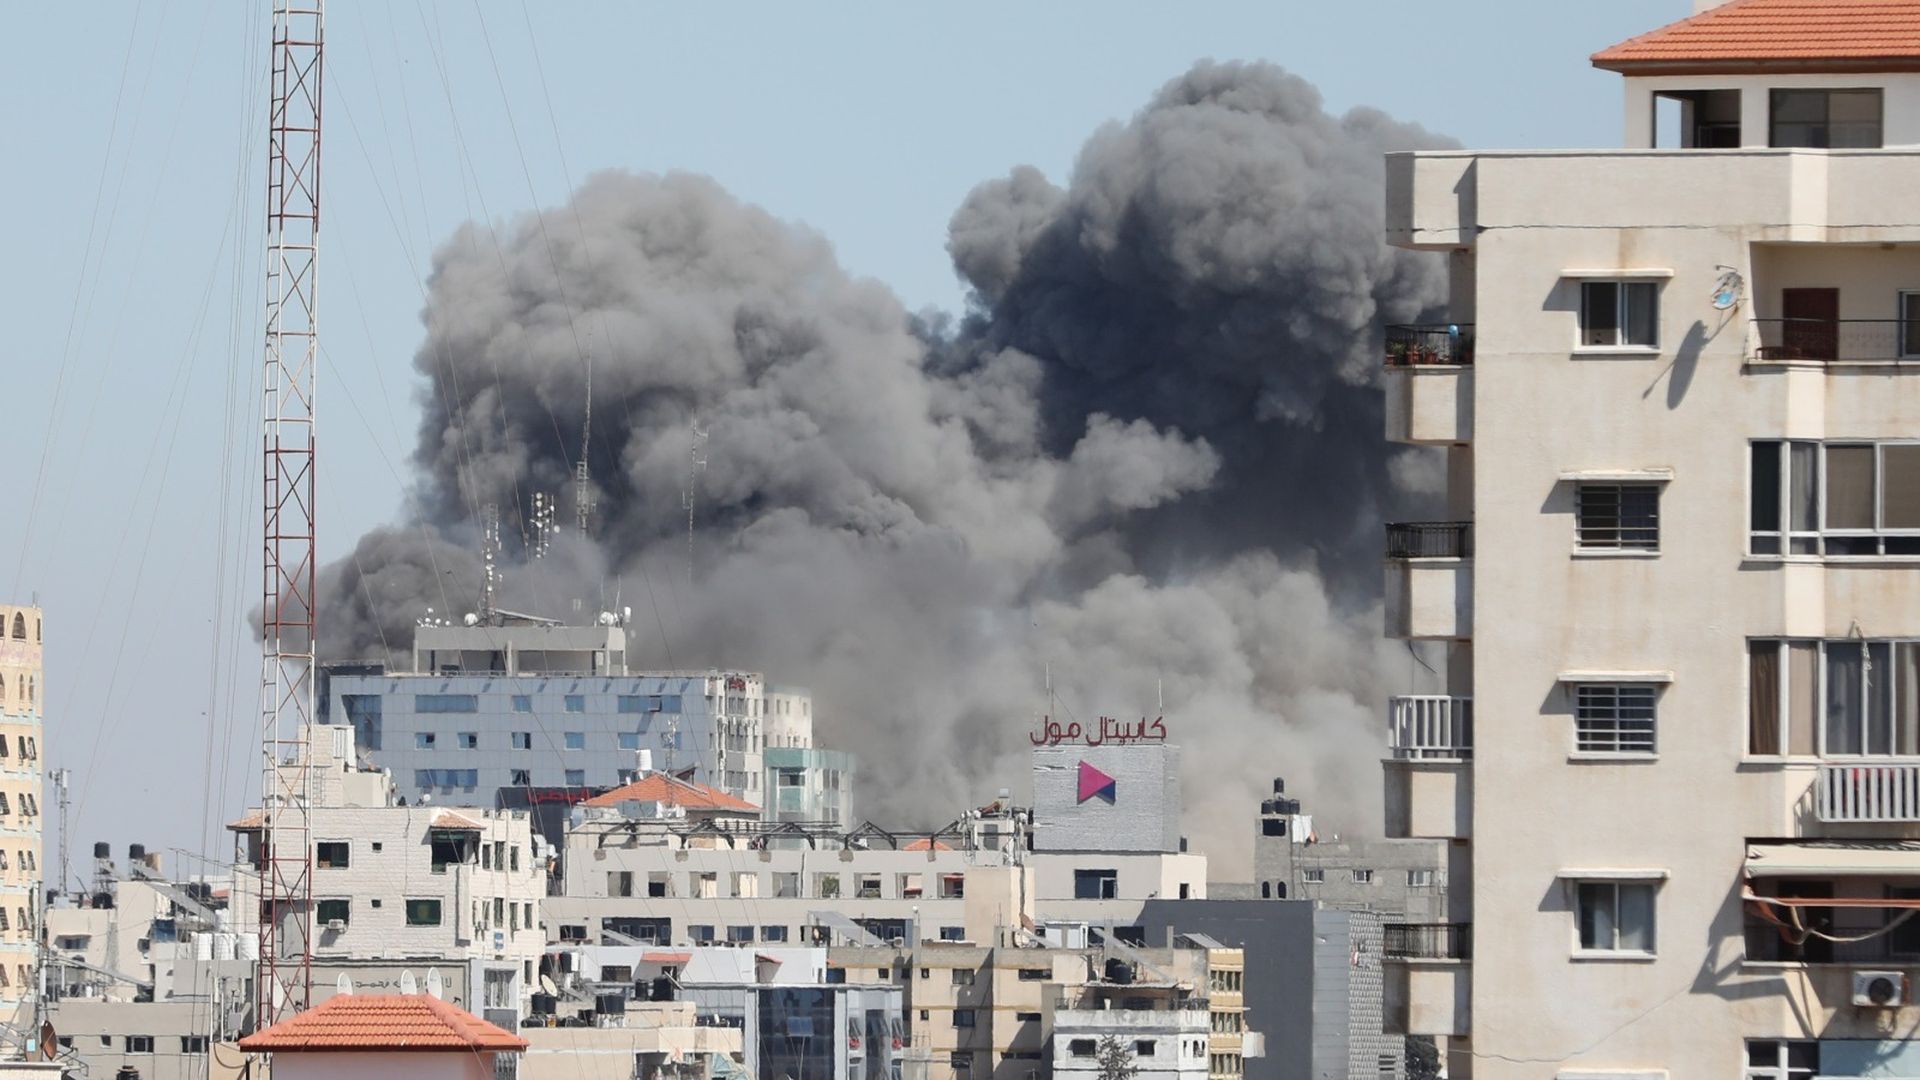 A high rise in Gaza shows smoke after it was hit by an airstrike